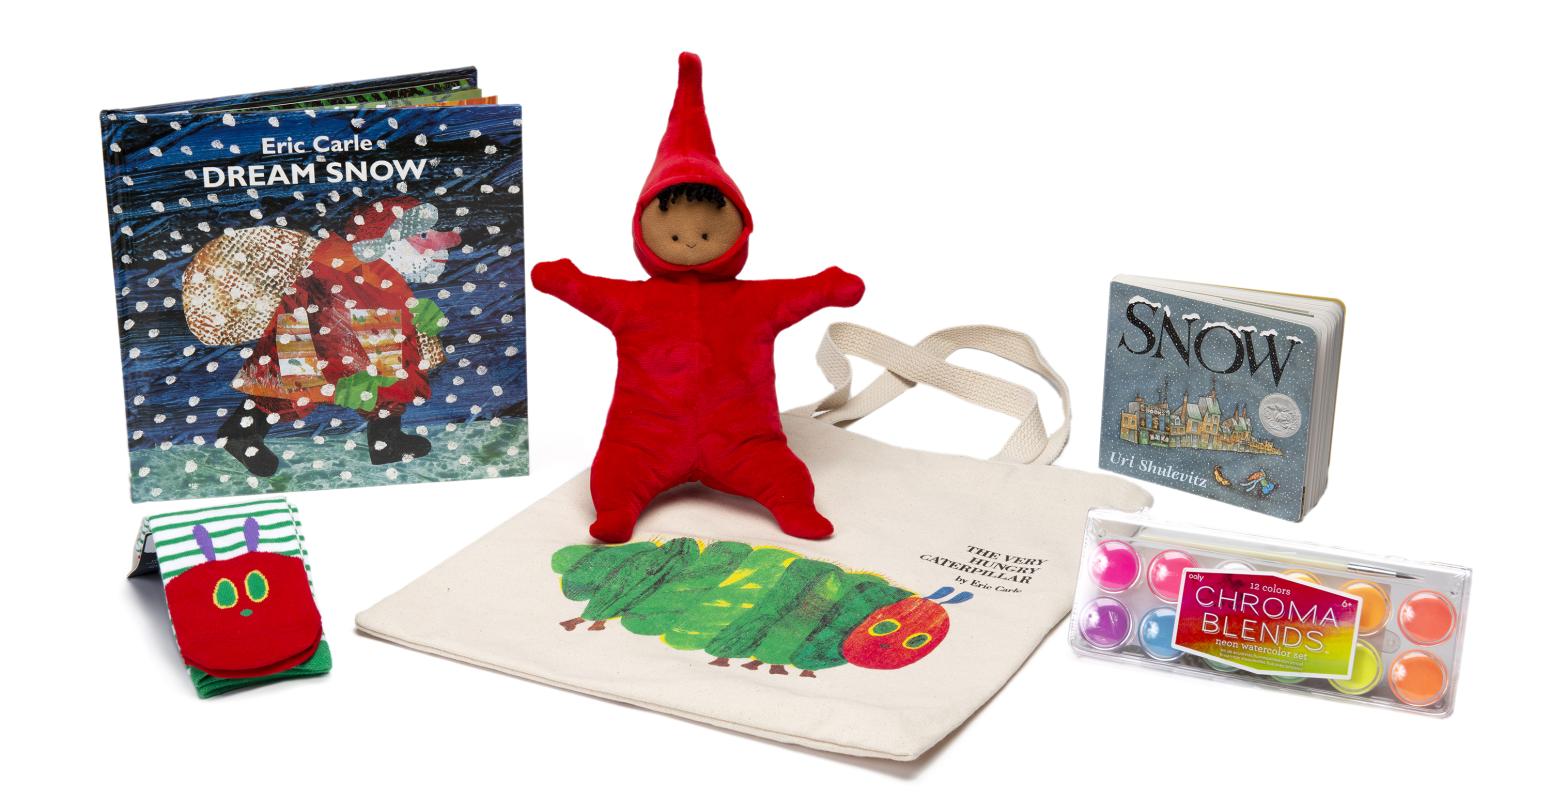 An assortment of gifts including children's books, art supplies and plush doll.